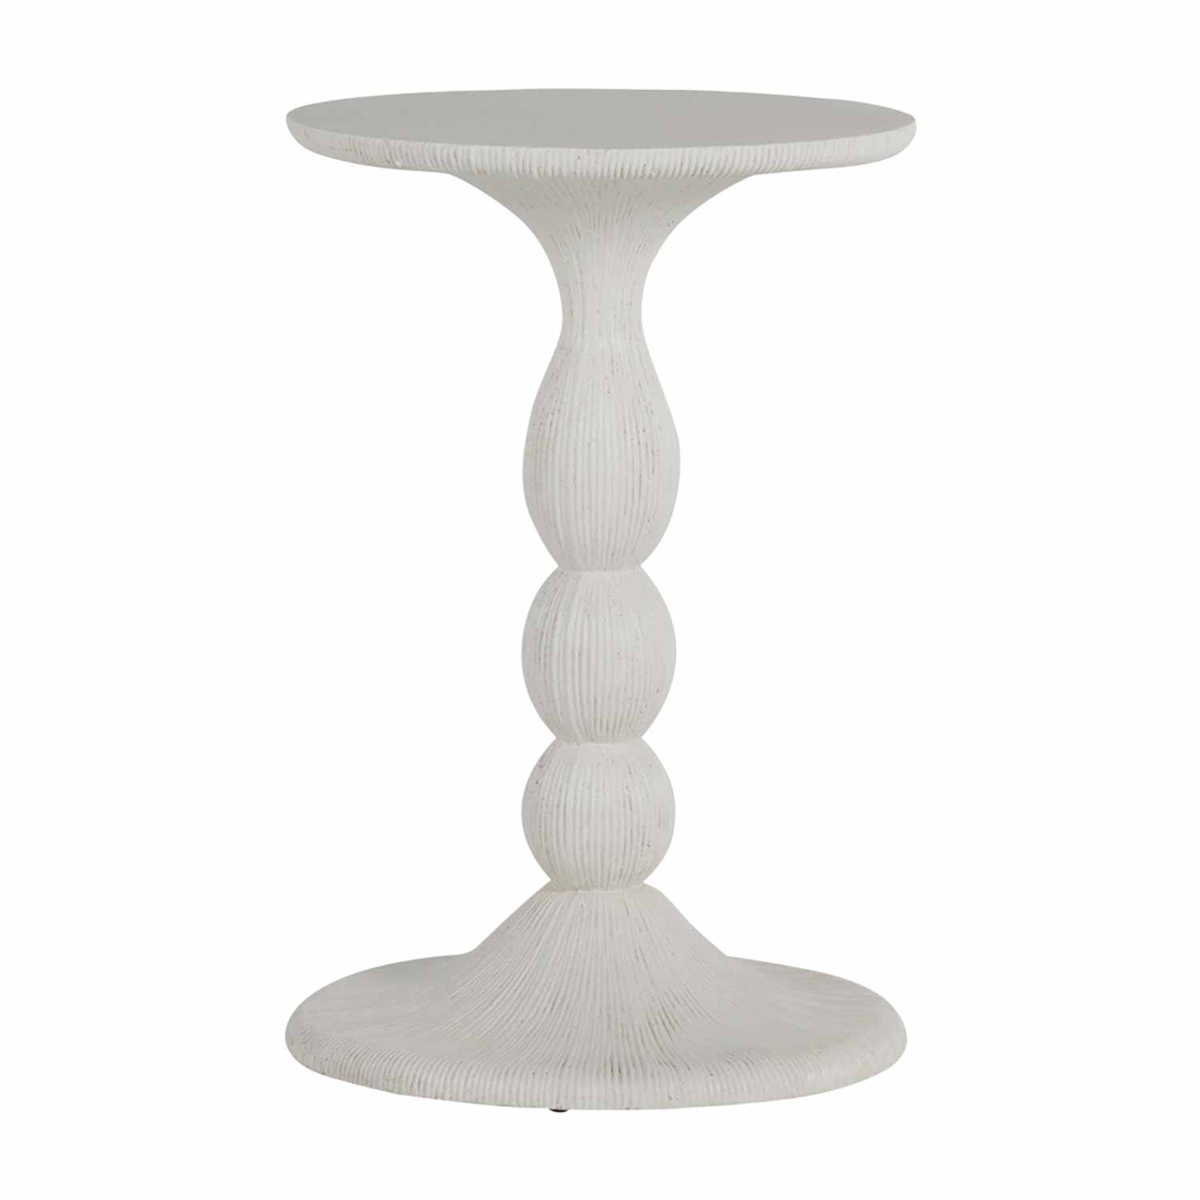 tern side table product image